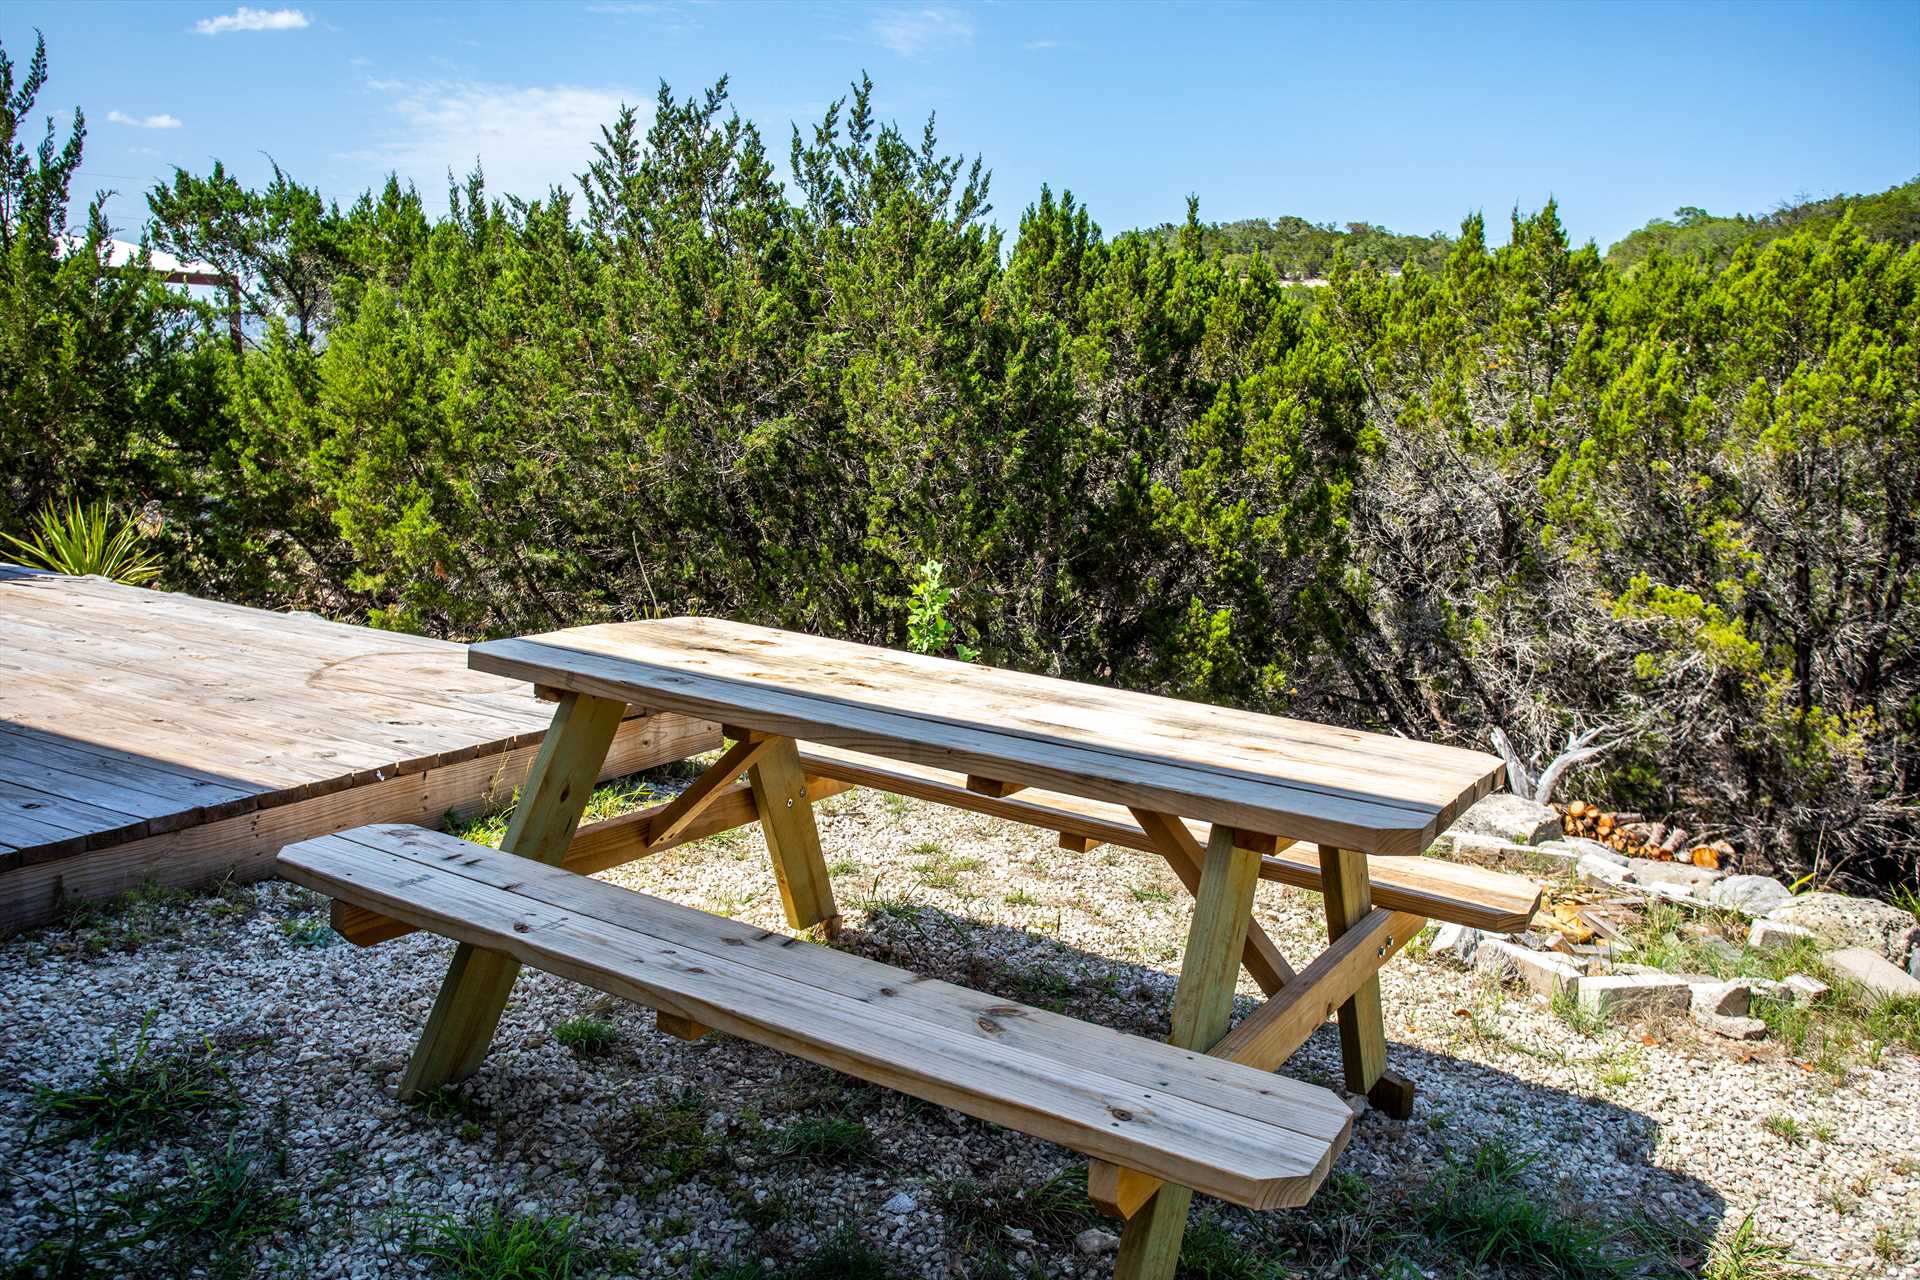                                                 Enjoy a meal-or just good company-around the picnic table! A BIG bonus is that amazing elevated view of the Hill Country!